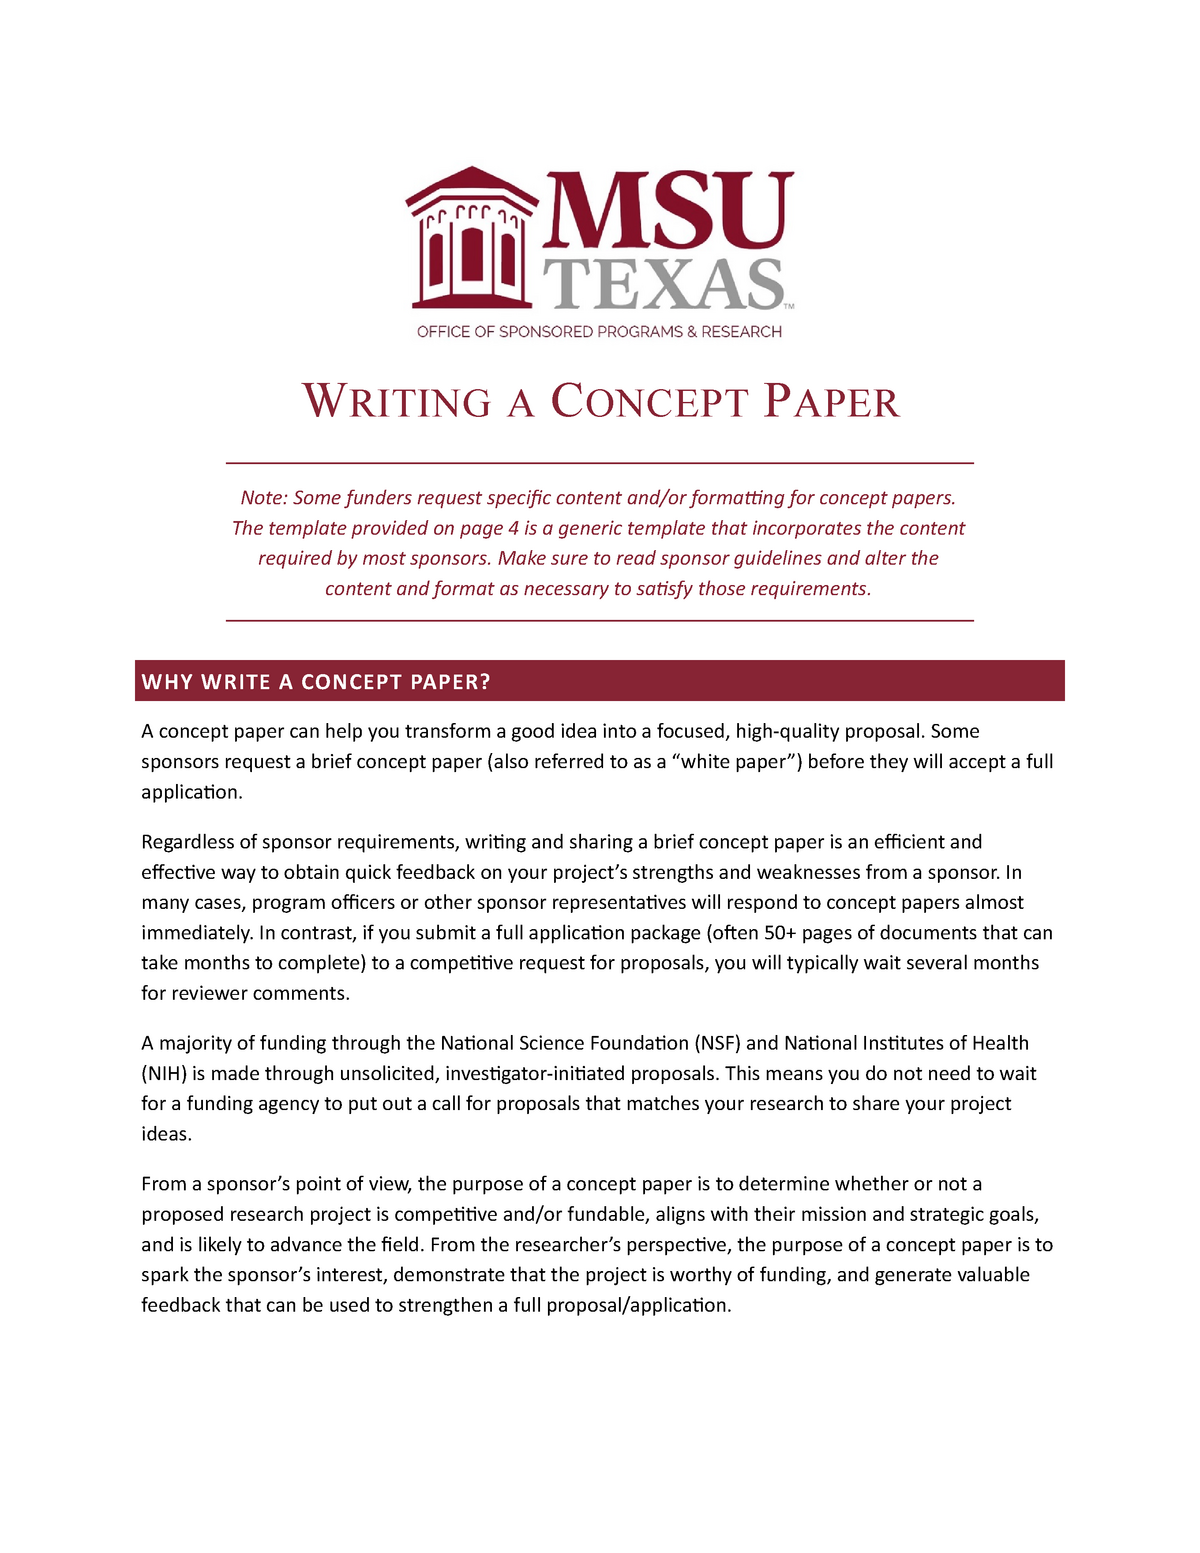 components of a research concept paper